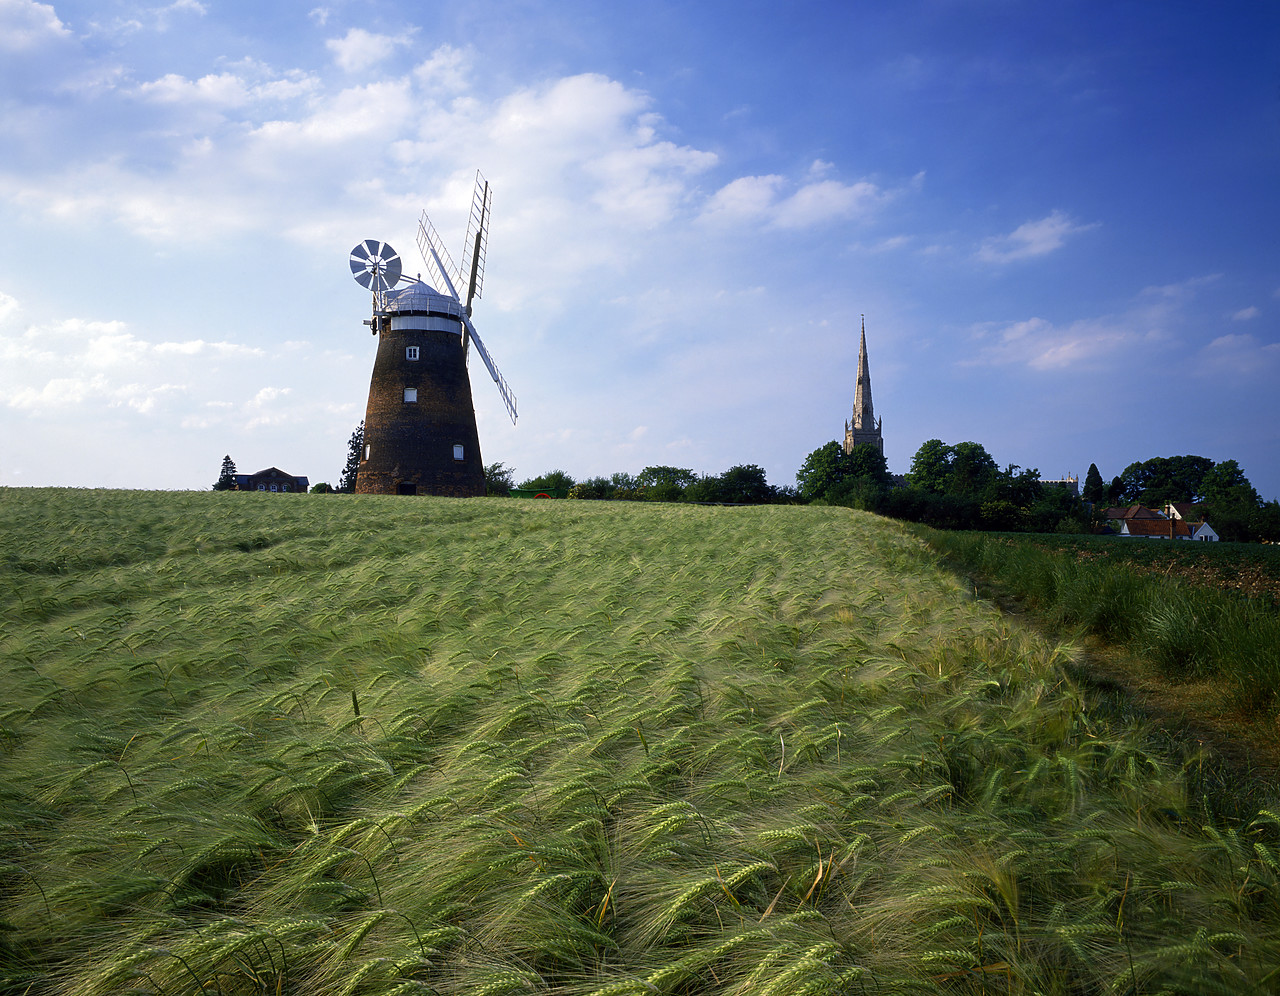 #892253 - Thaxted Mill, Thaxted, Essex, England